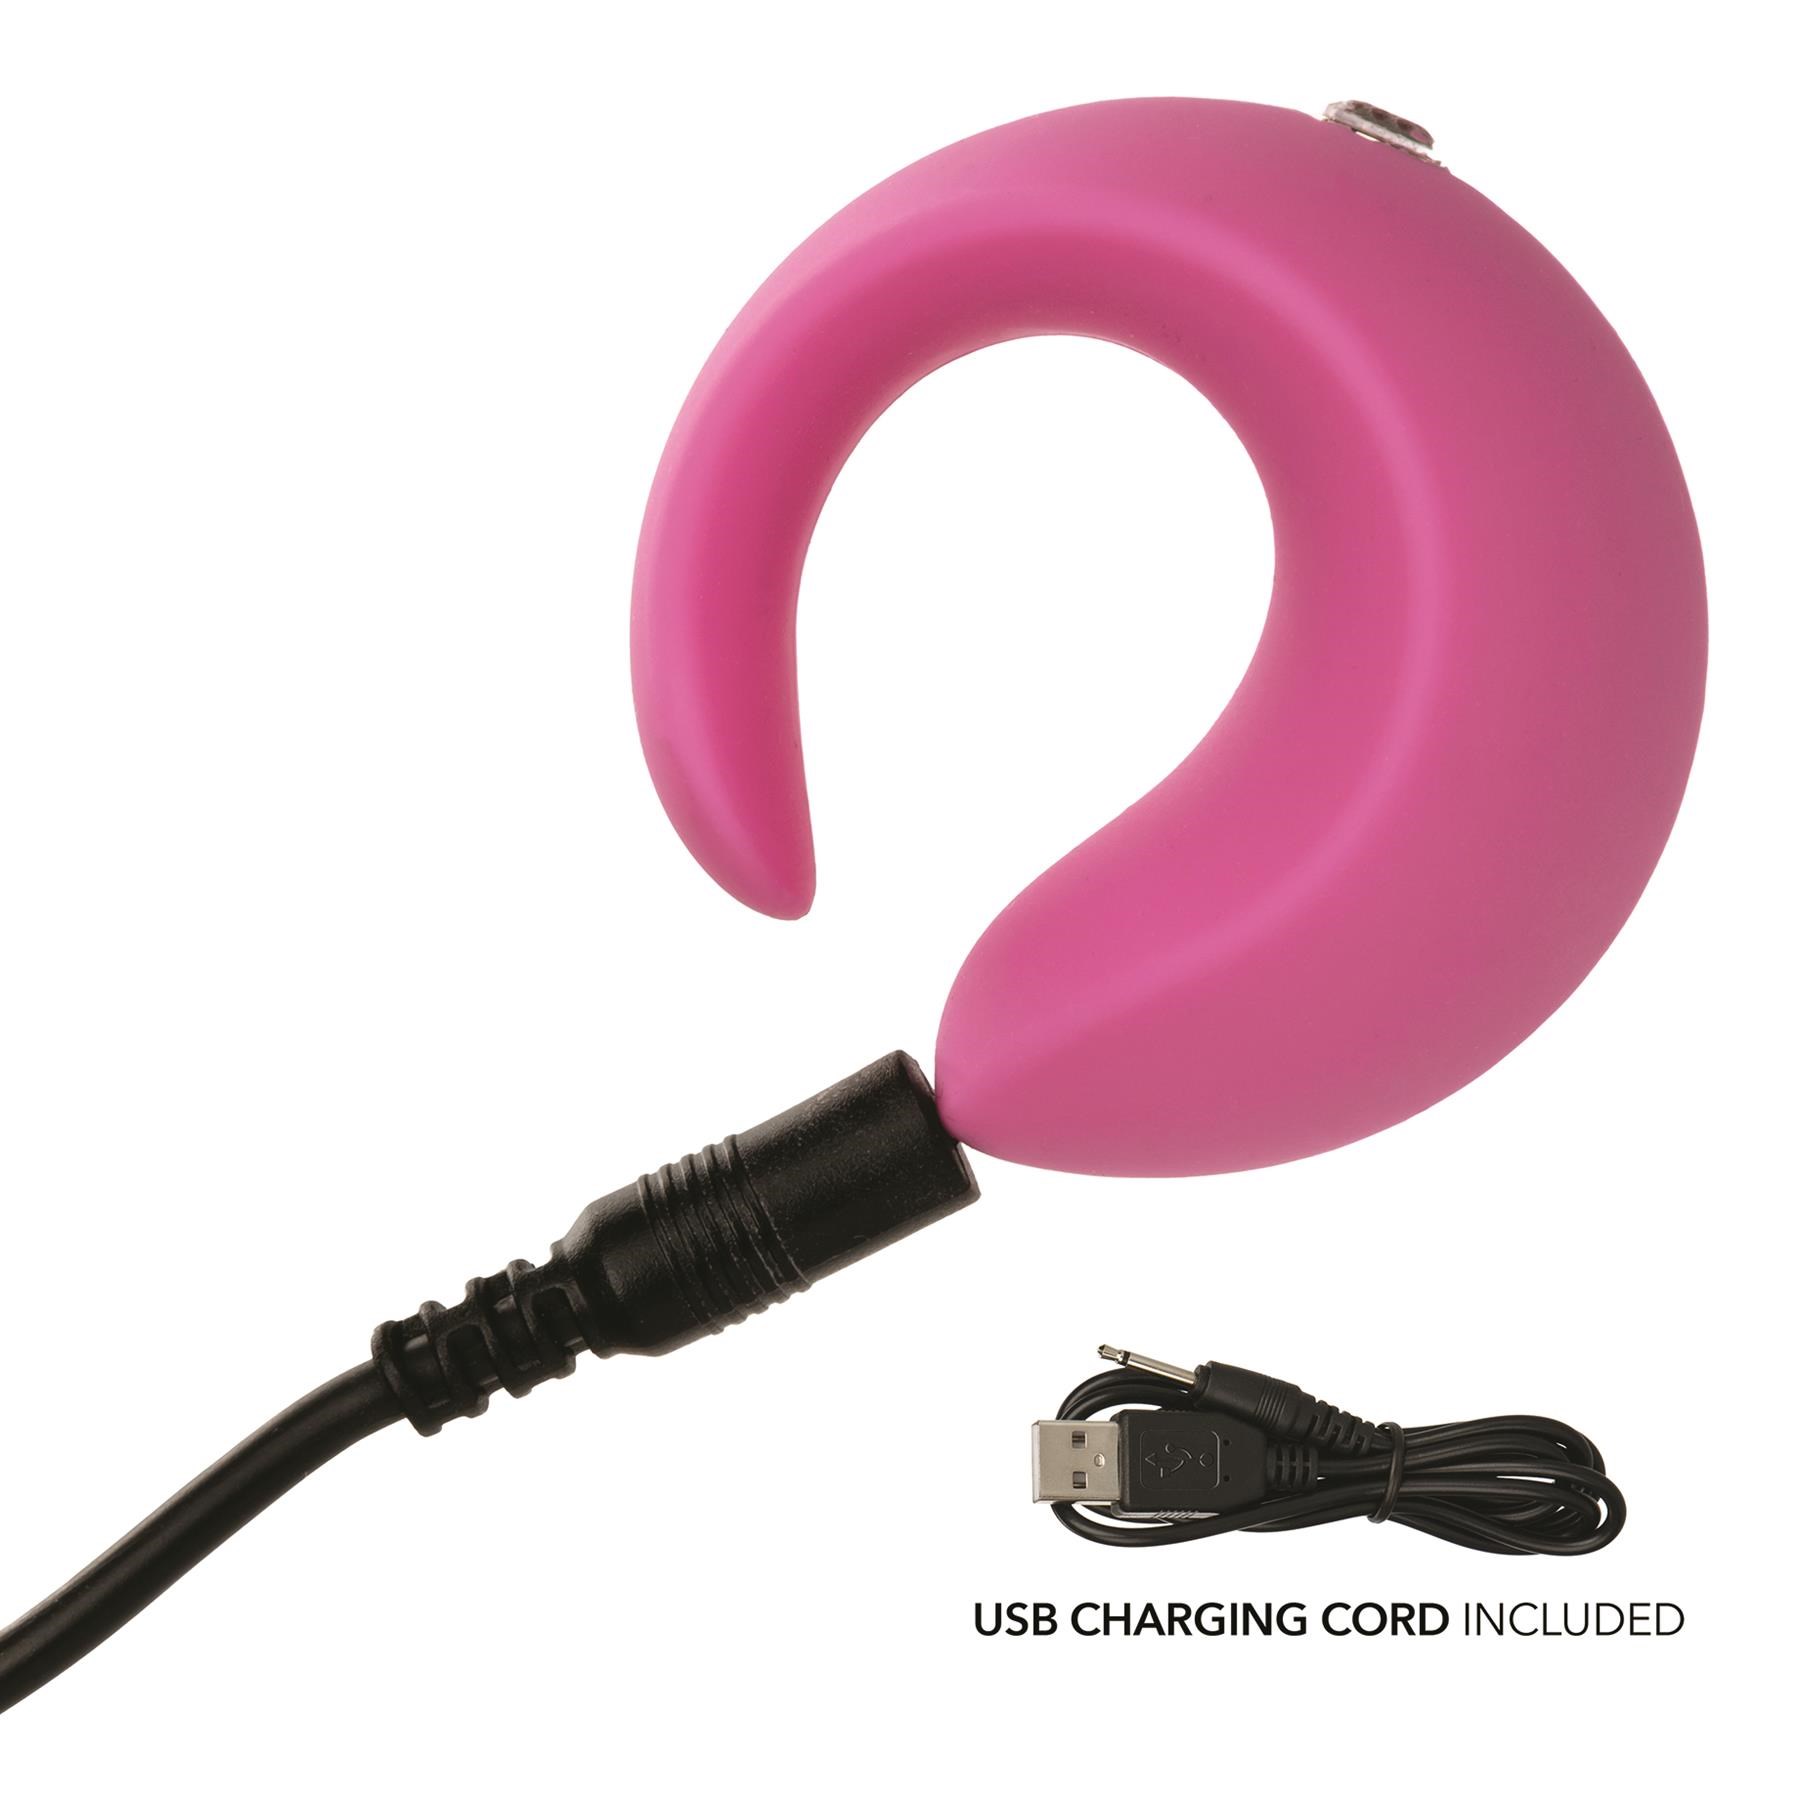 Luvmor "O"s Finger Vibrator - Product Shot Showing Where Charging Cable is Placed